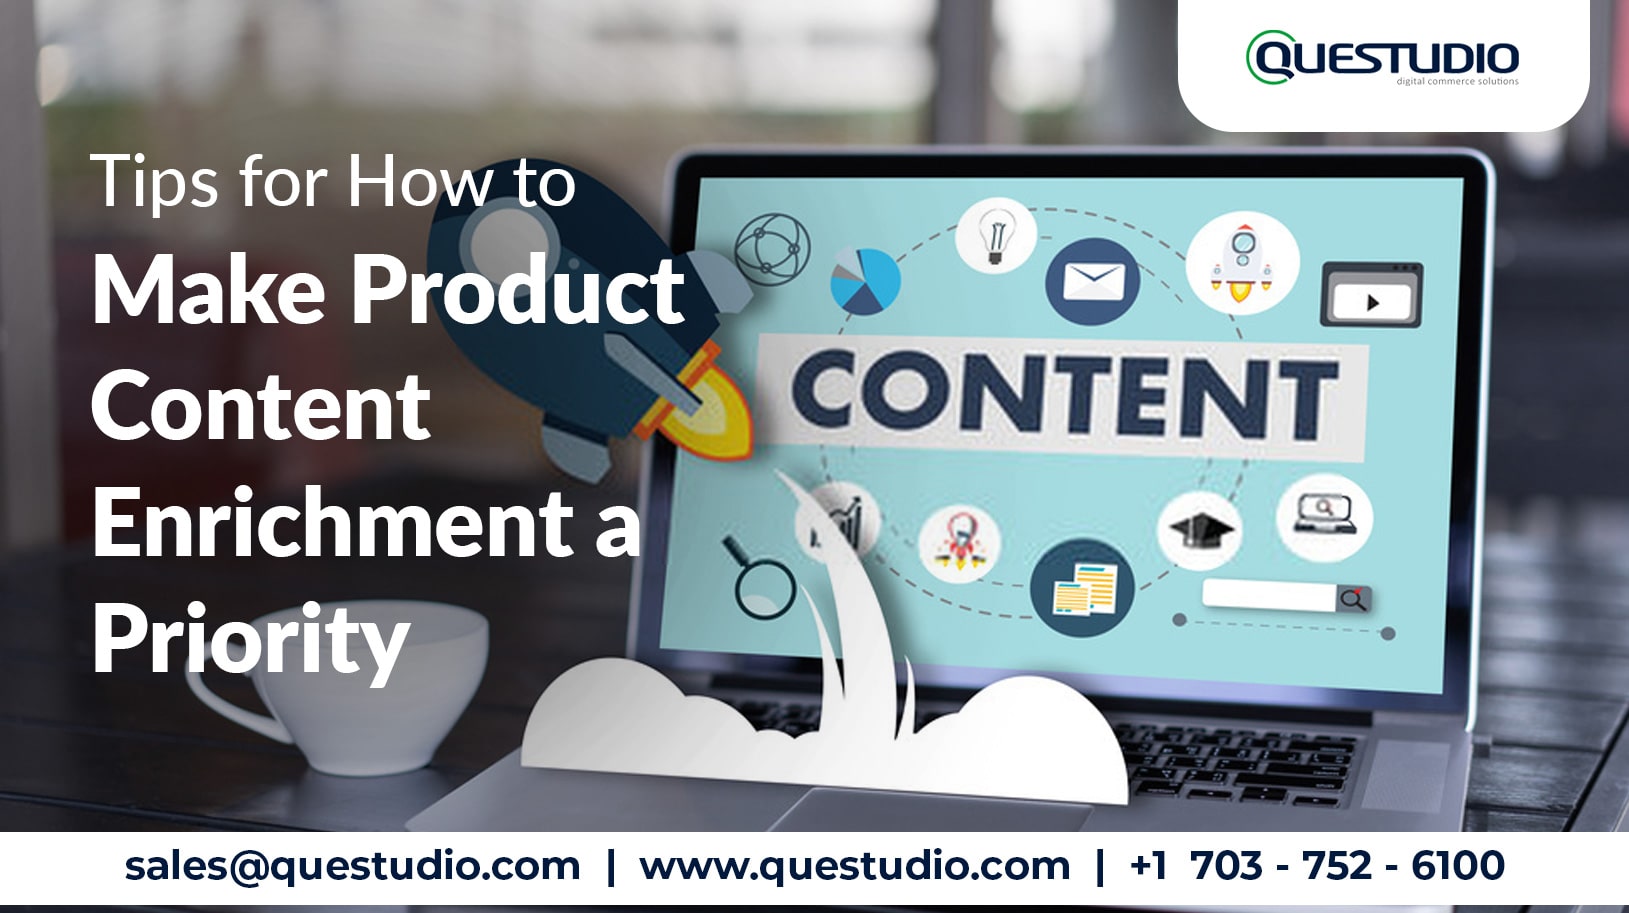 Tips for How to Make Product Content Enrichment a Priority